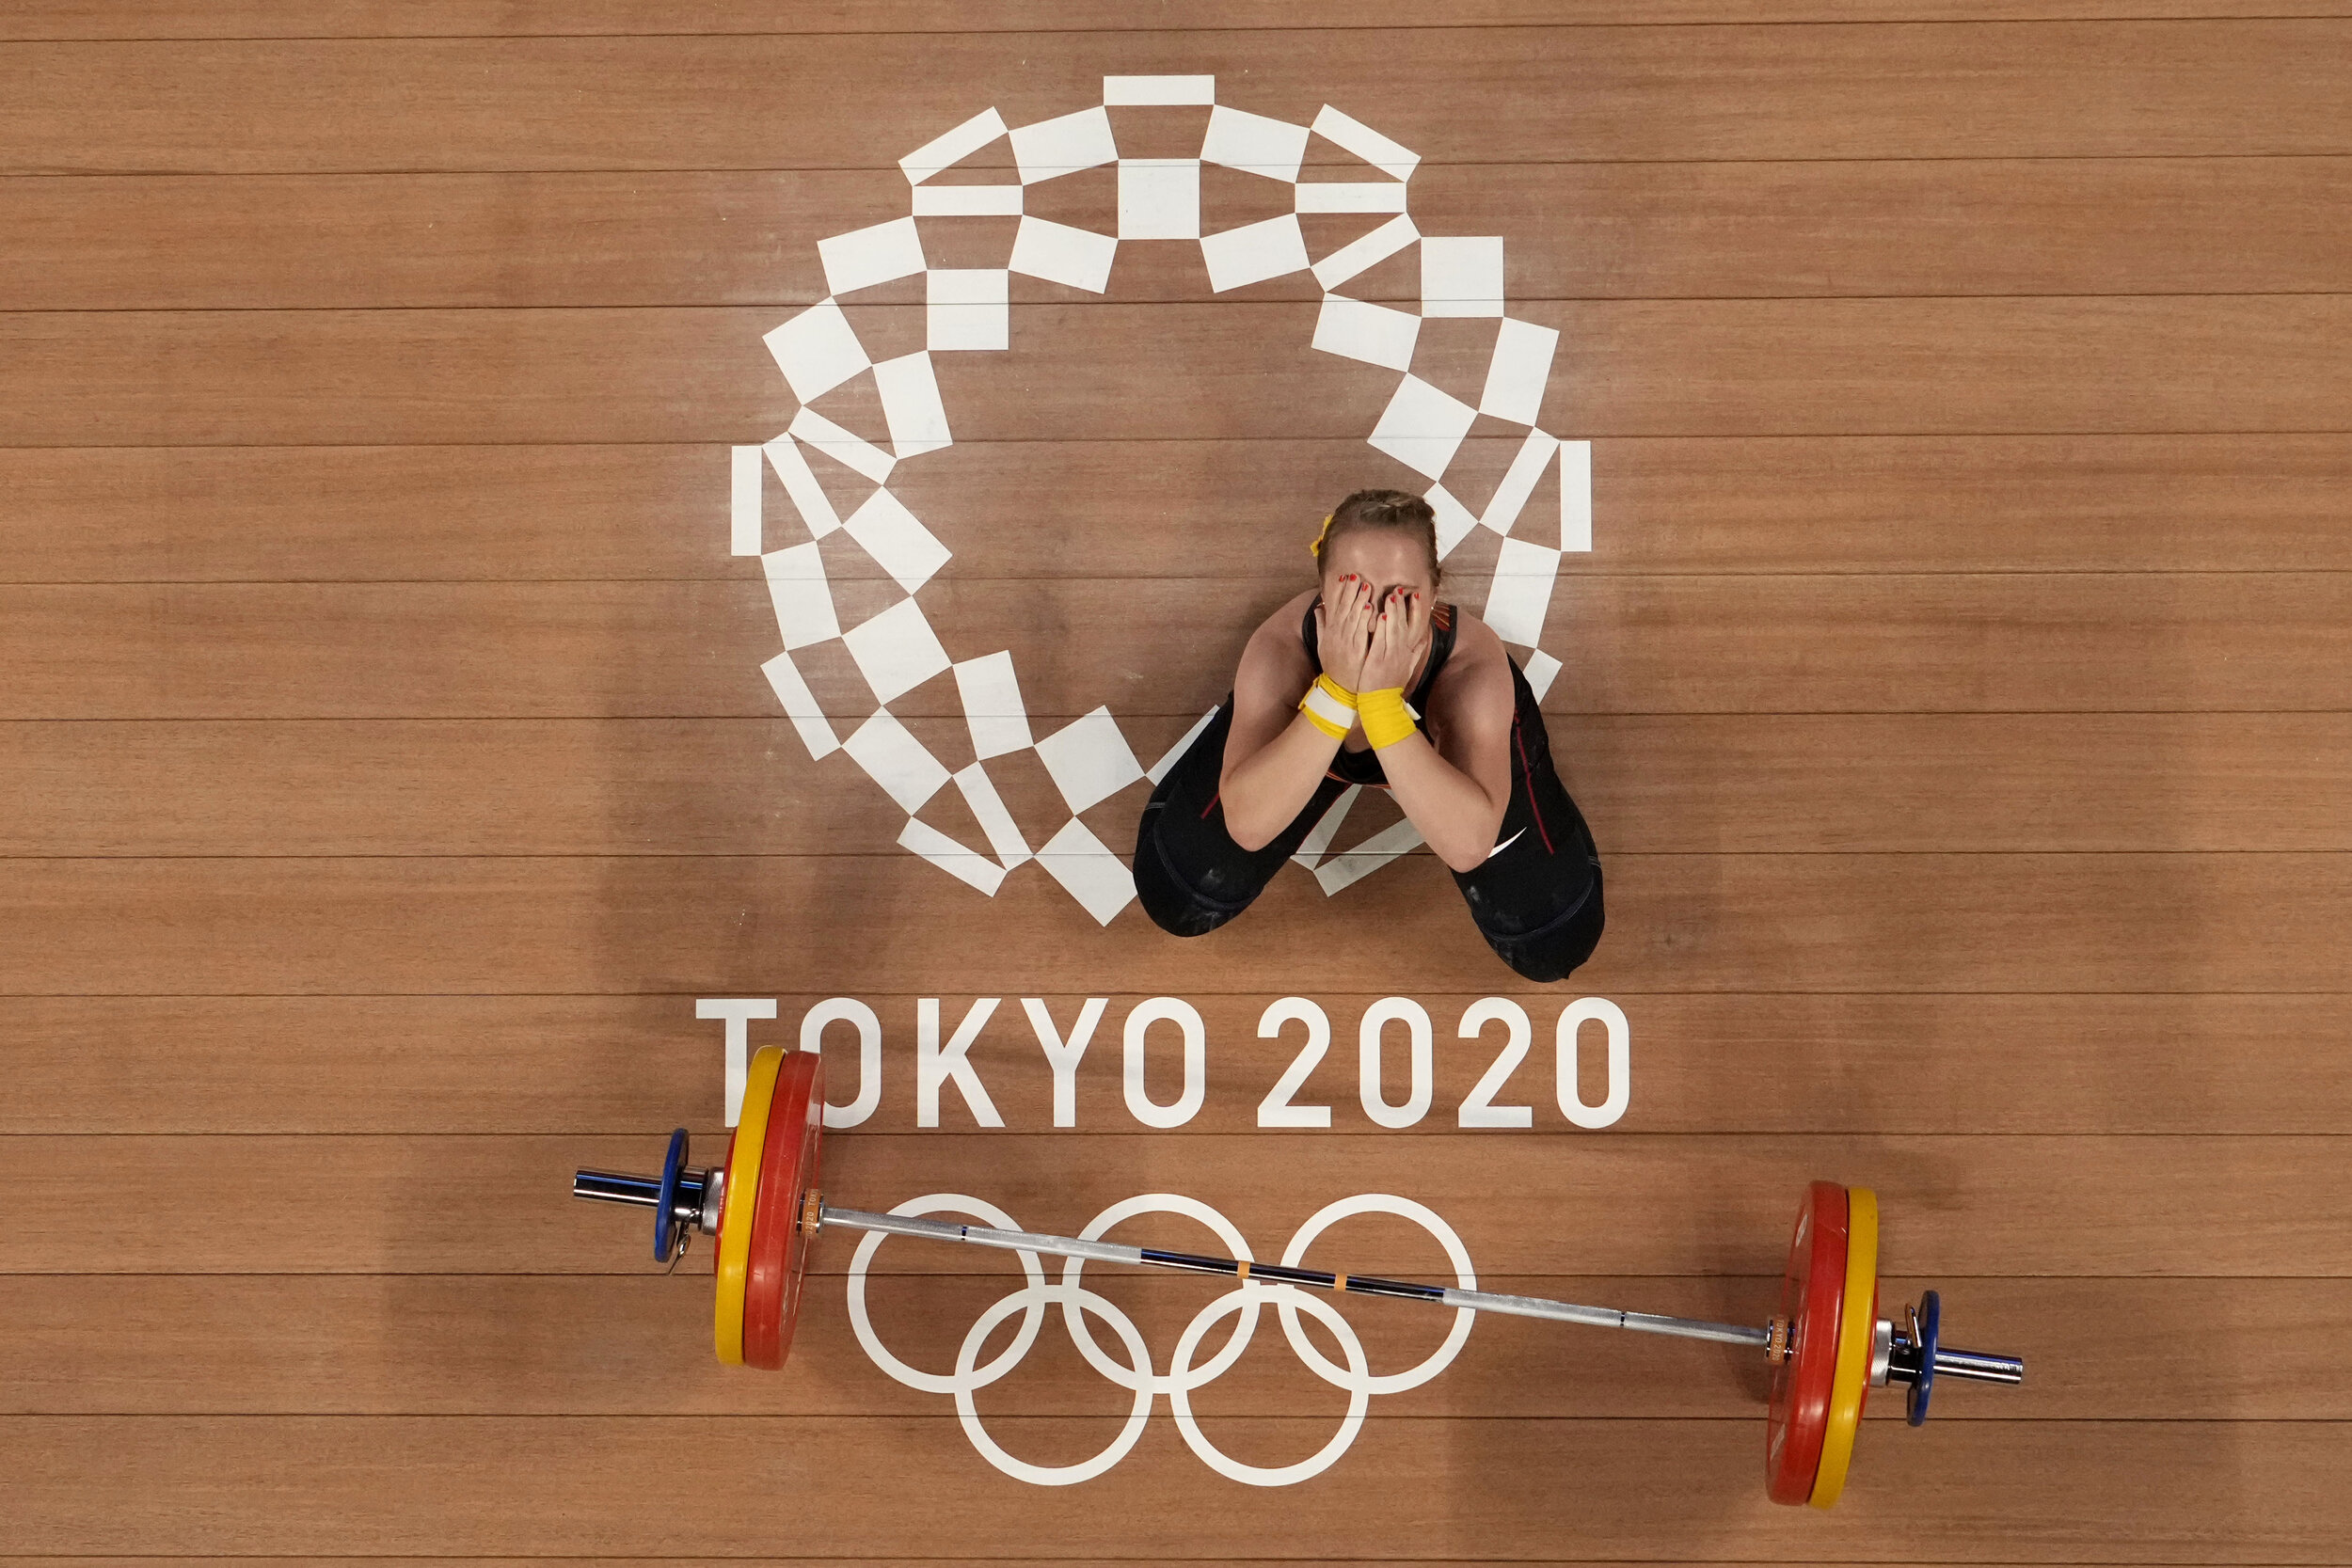  Sabine Beate Kusterer of Germany gestures after an unsuccessful lift during the women's 59kg weightlifting event, at the 2020 Summer Olympics, Tuesday, July 27, 2021, in Tokyo, Japan. (AP Photo/Luca Bruno) 